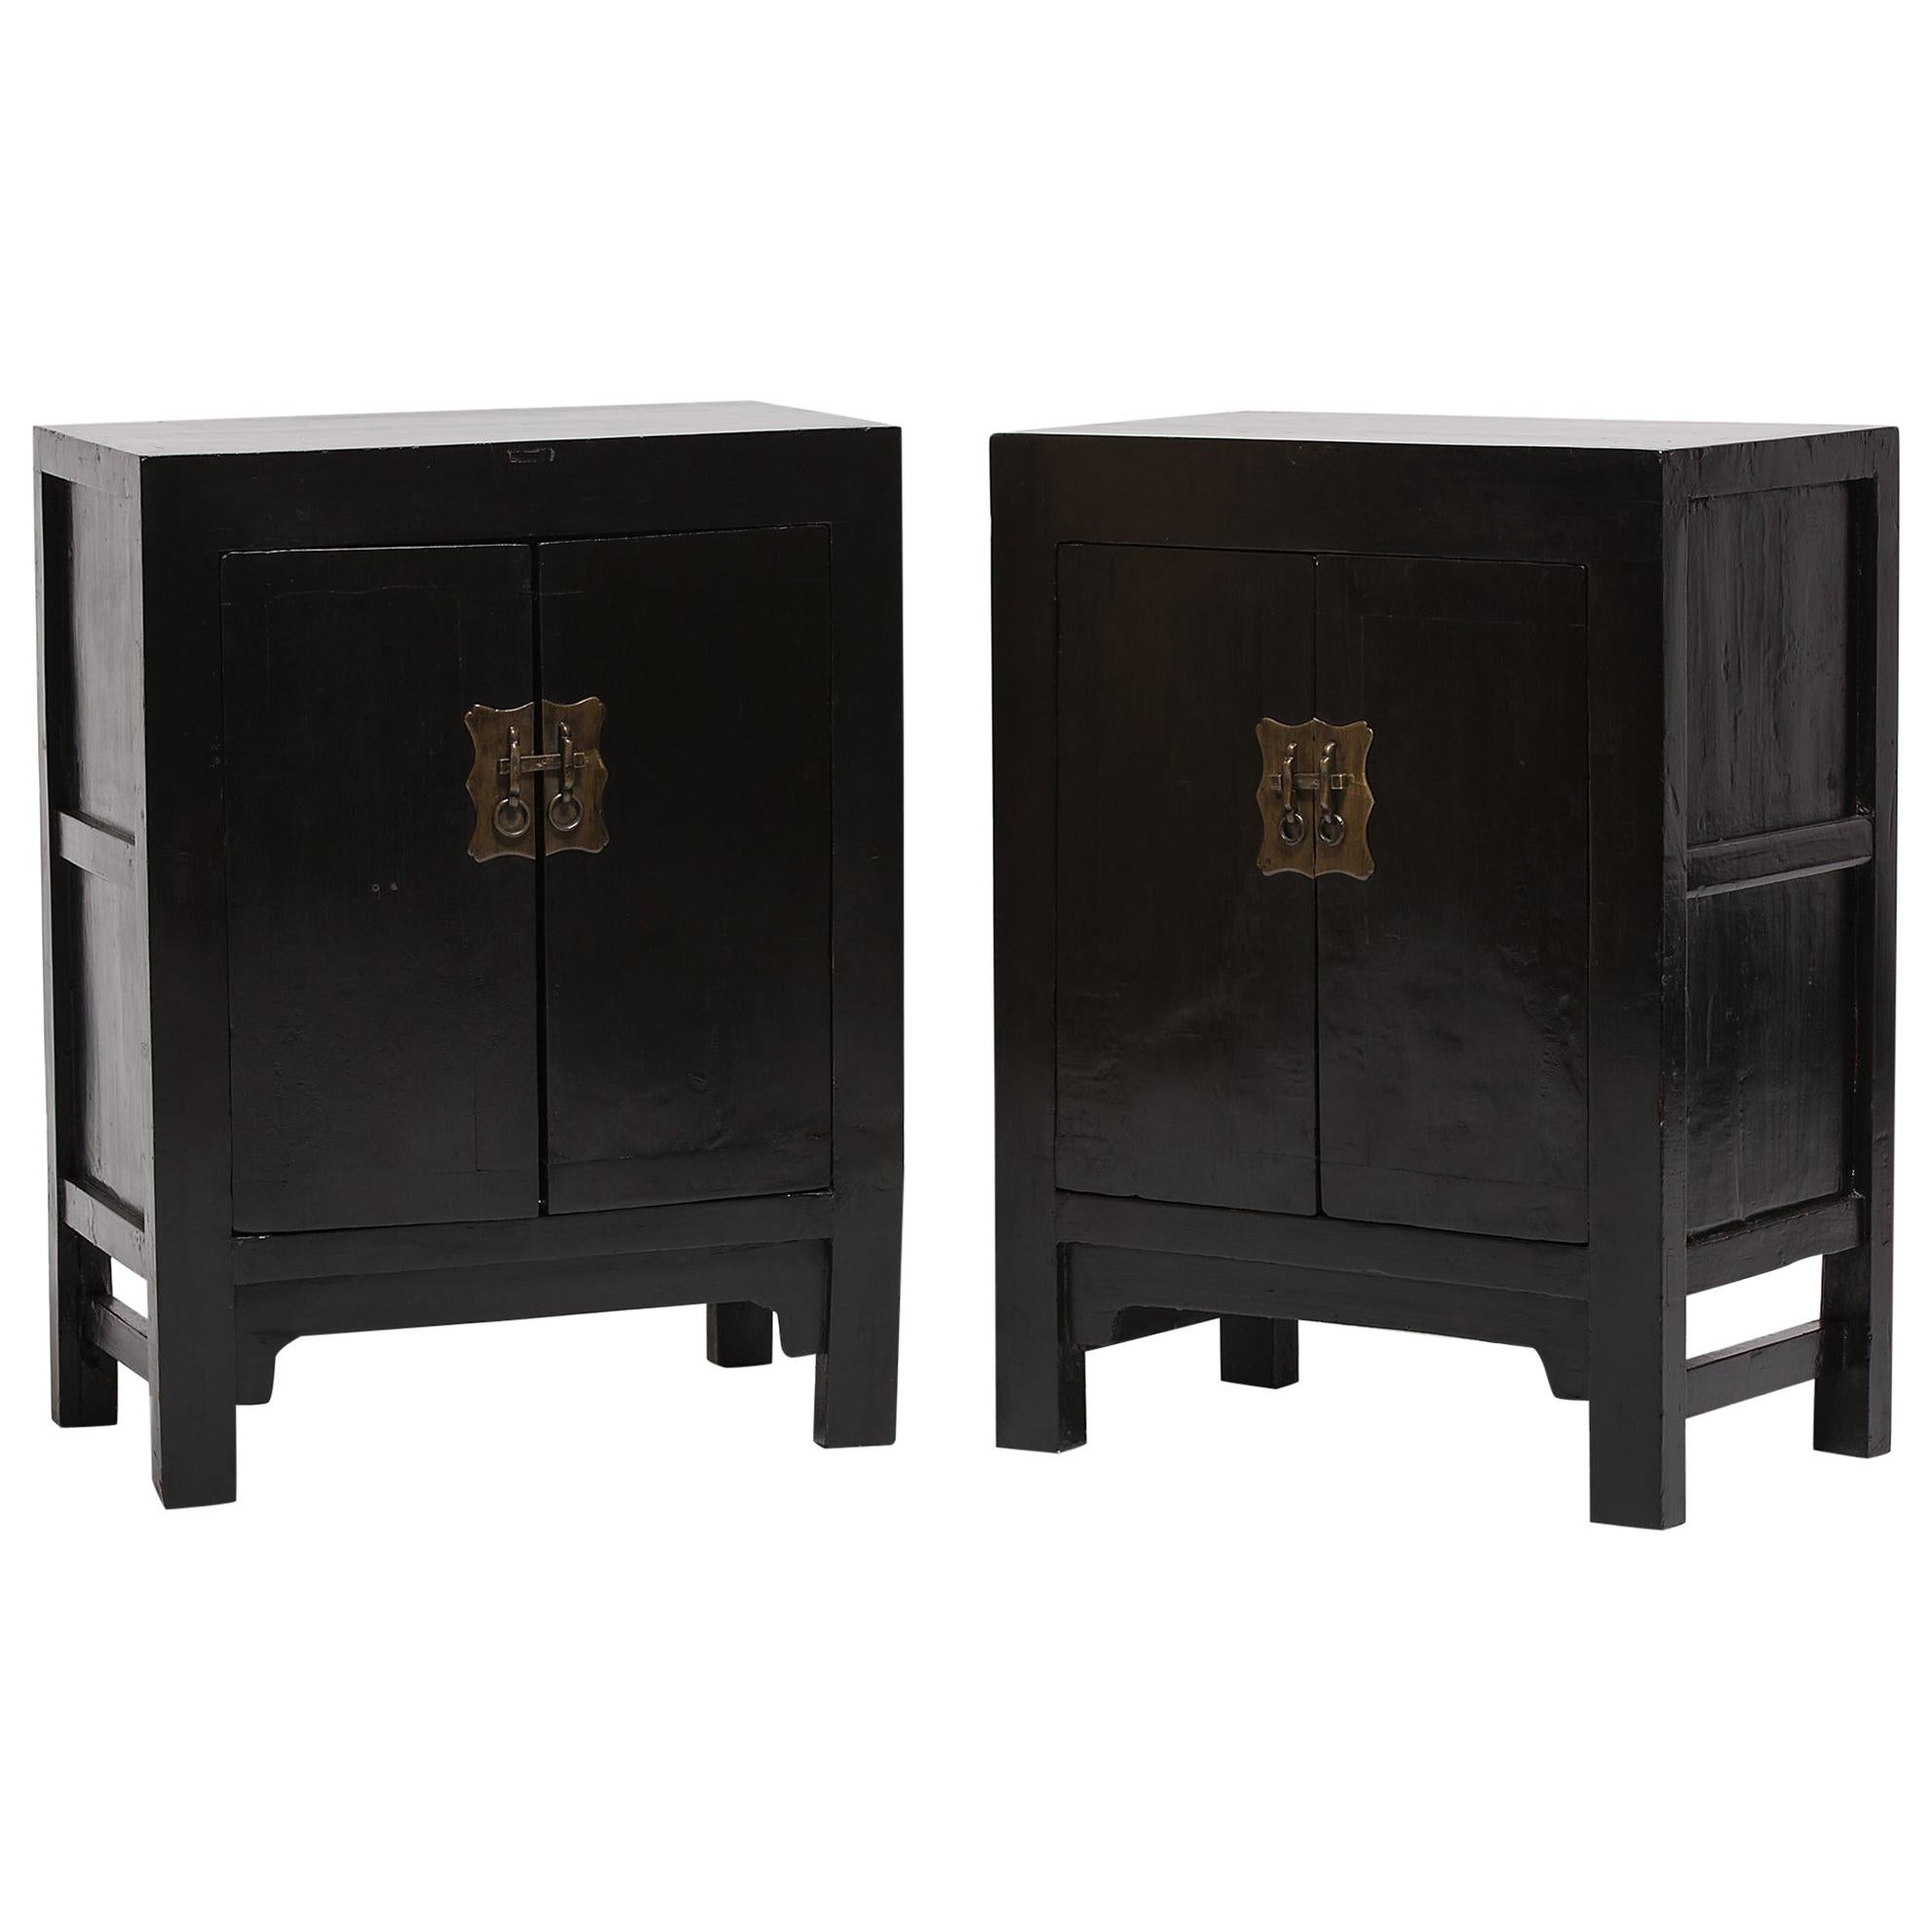 Pair of 19th Century Chinese Black Lacquer Locking Cabinets